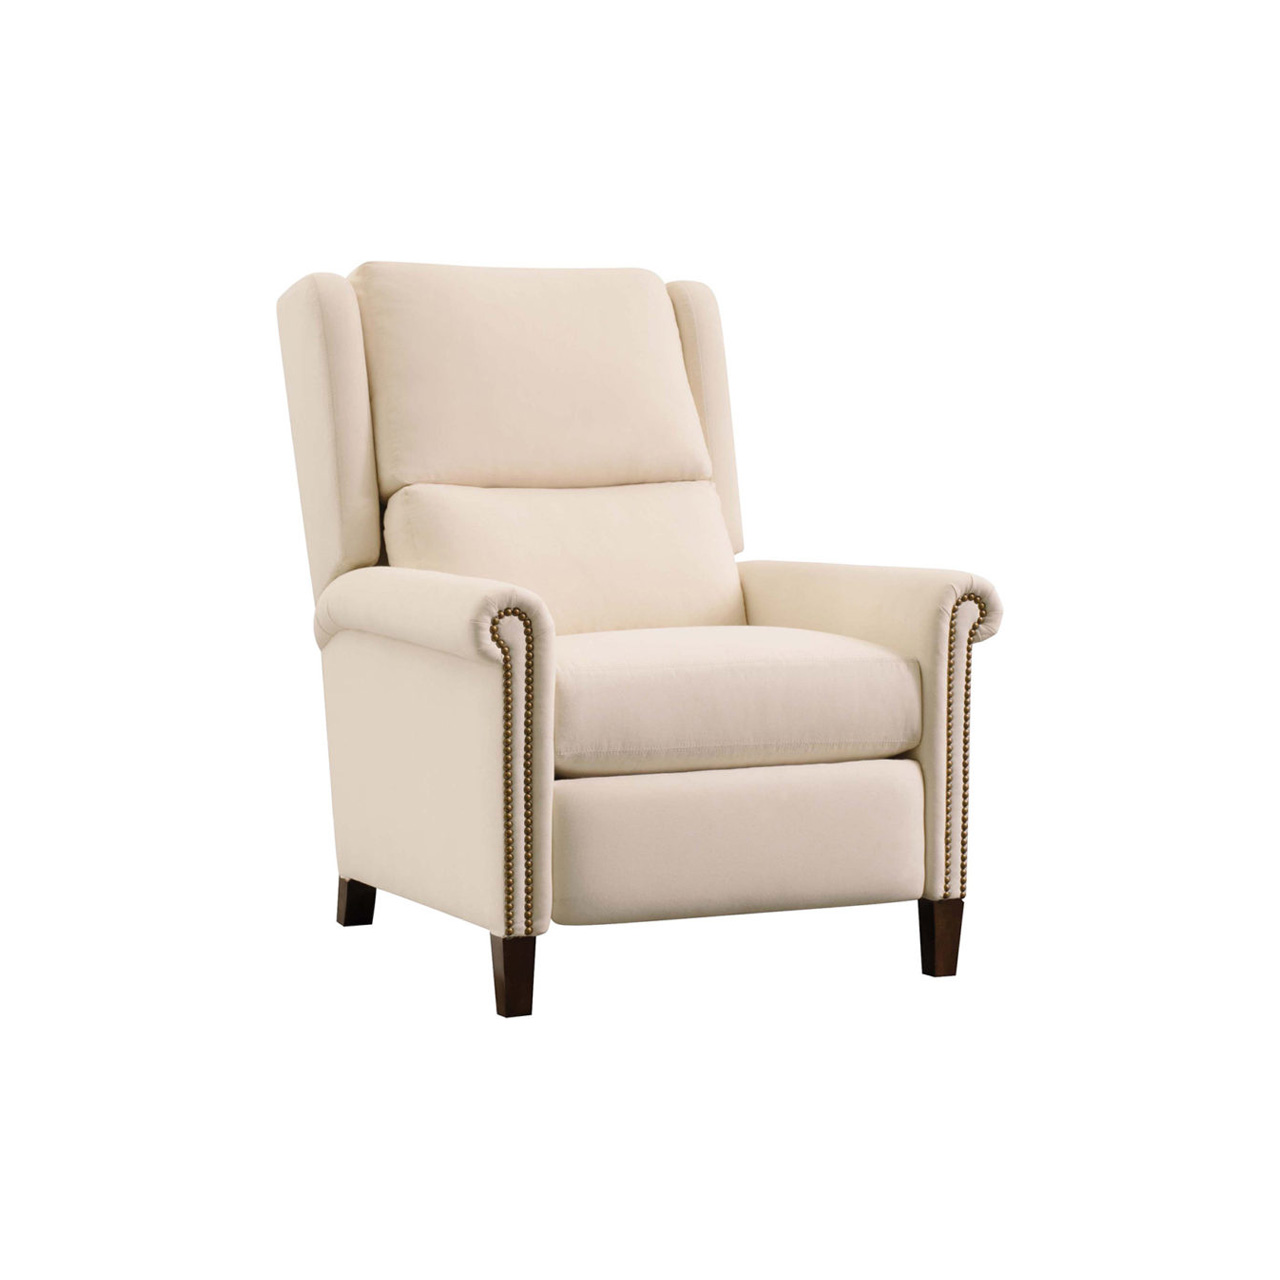 Woodlands Small Roll Arm Chair